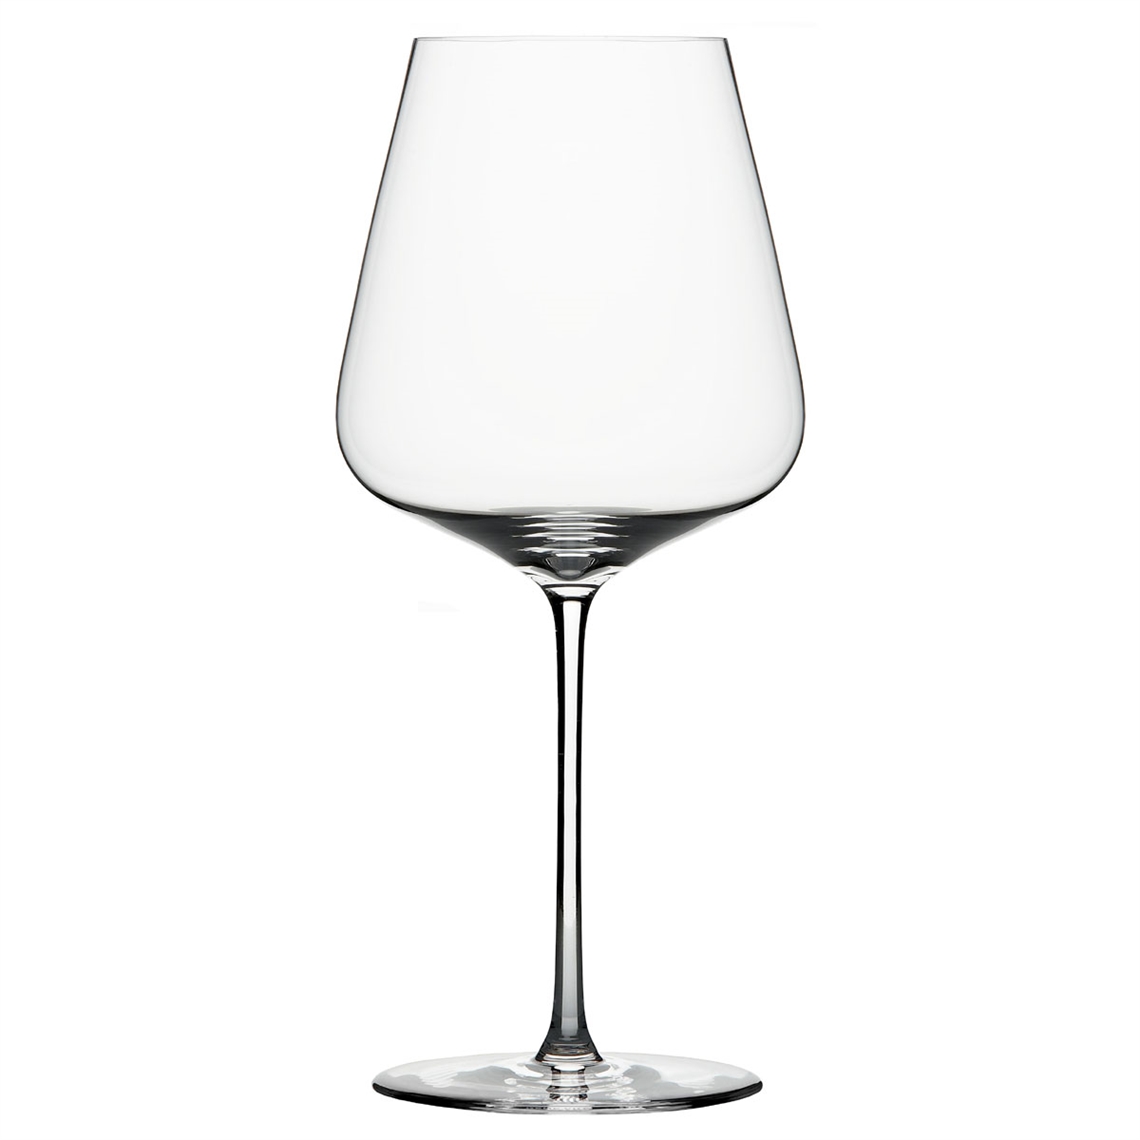 View more new york bar from our Premium Mouth Blown Glassware range